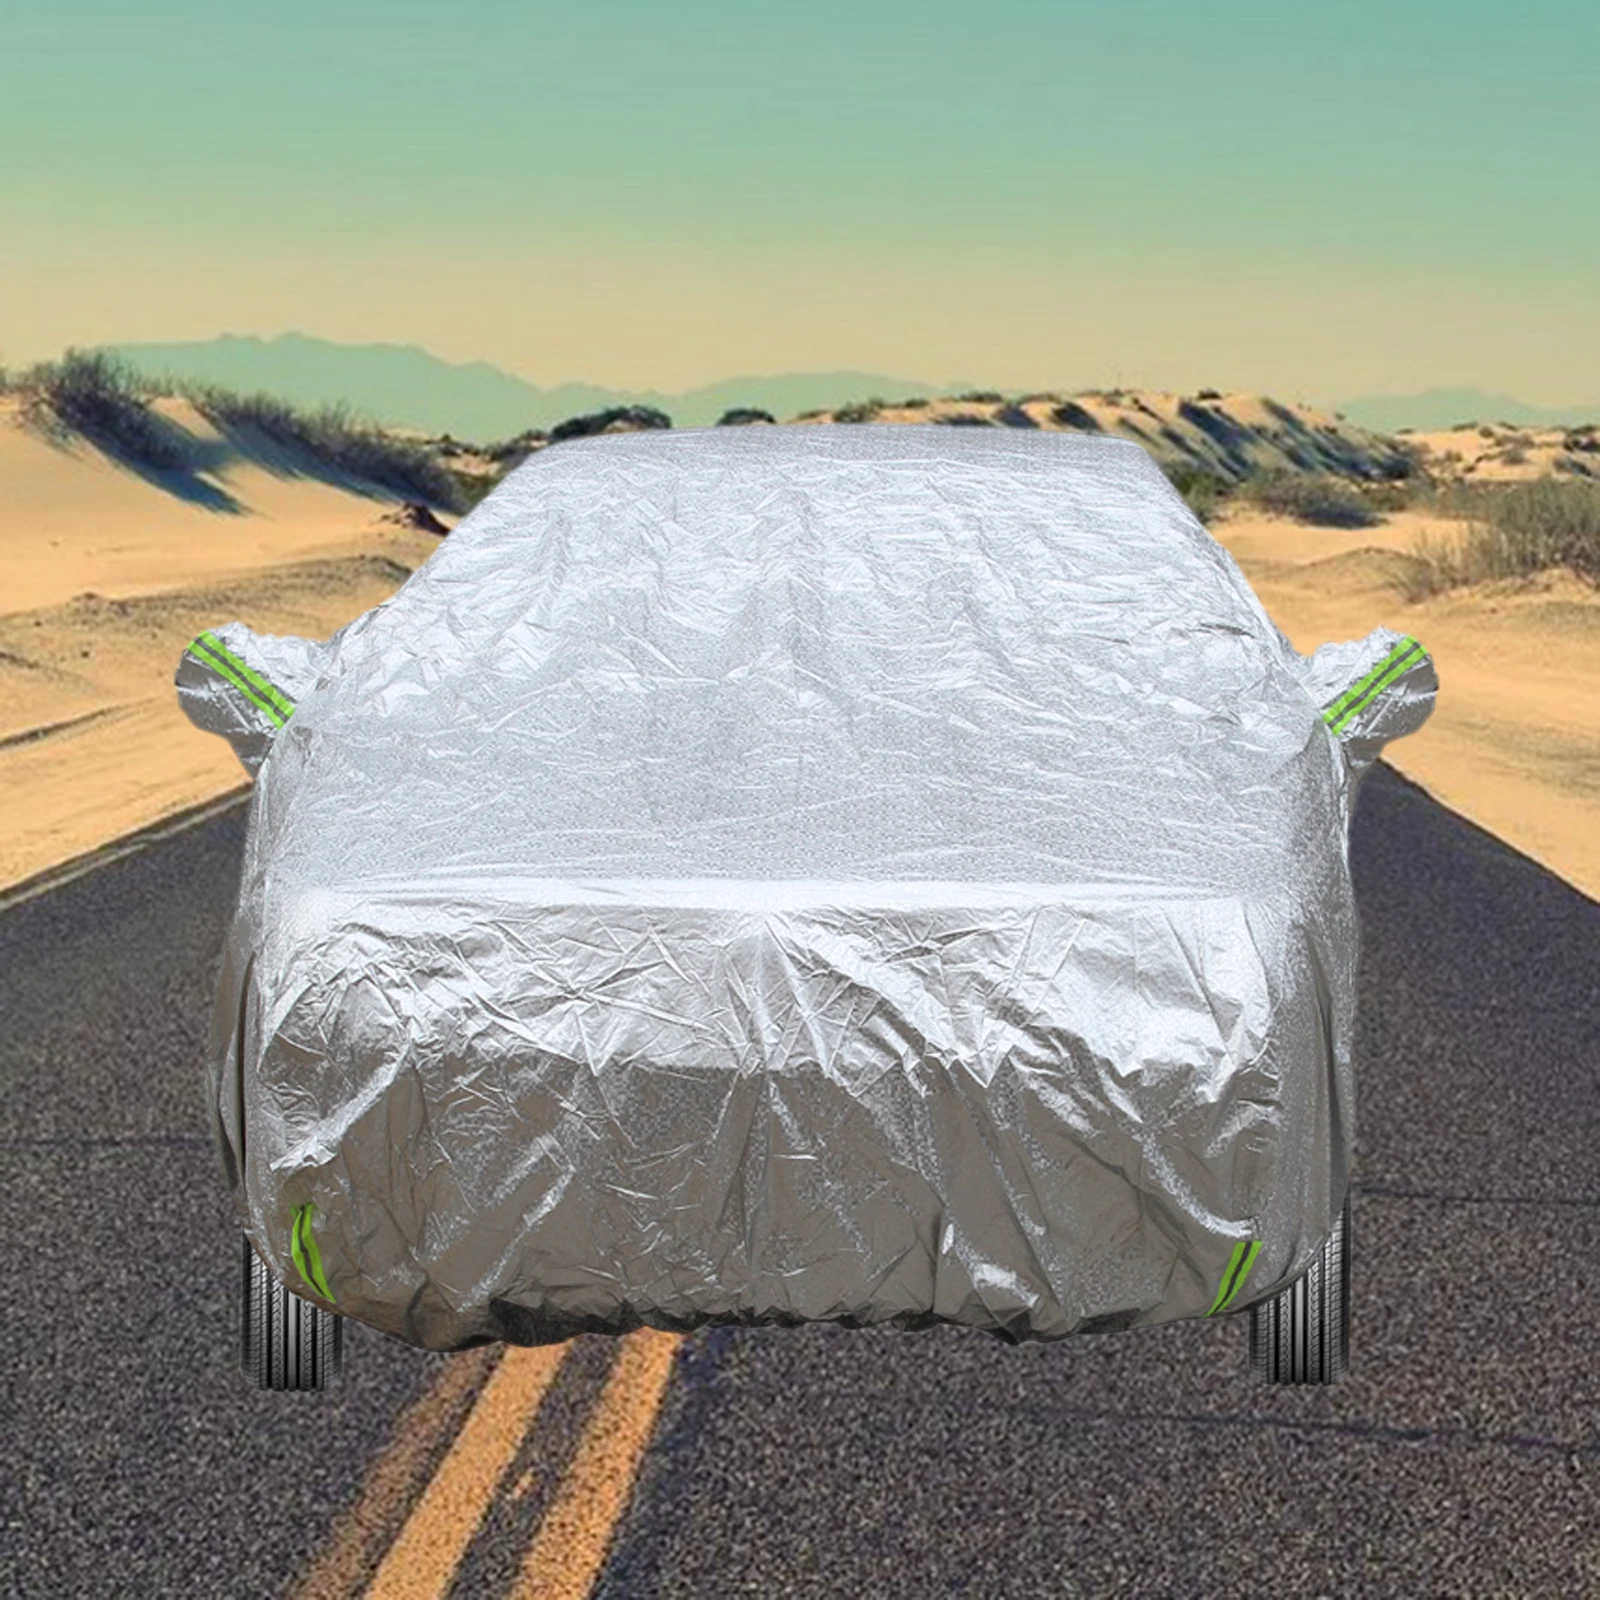 Full Car Cover Waterproof Rain Dust Sun UV Resistant Sunshade Protector All Weather Protection Scratchproof Breathable